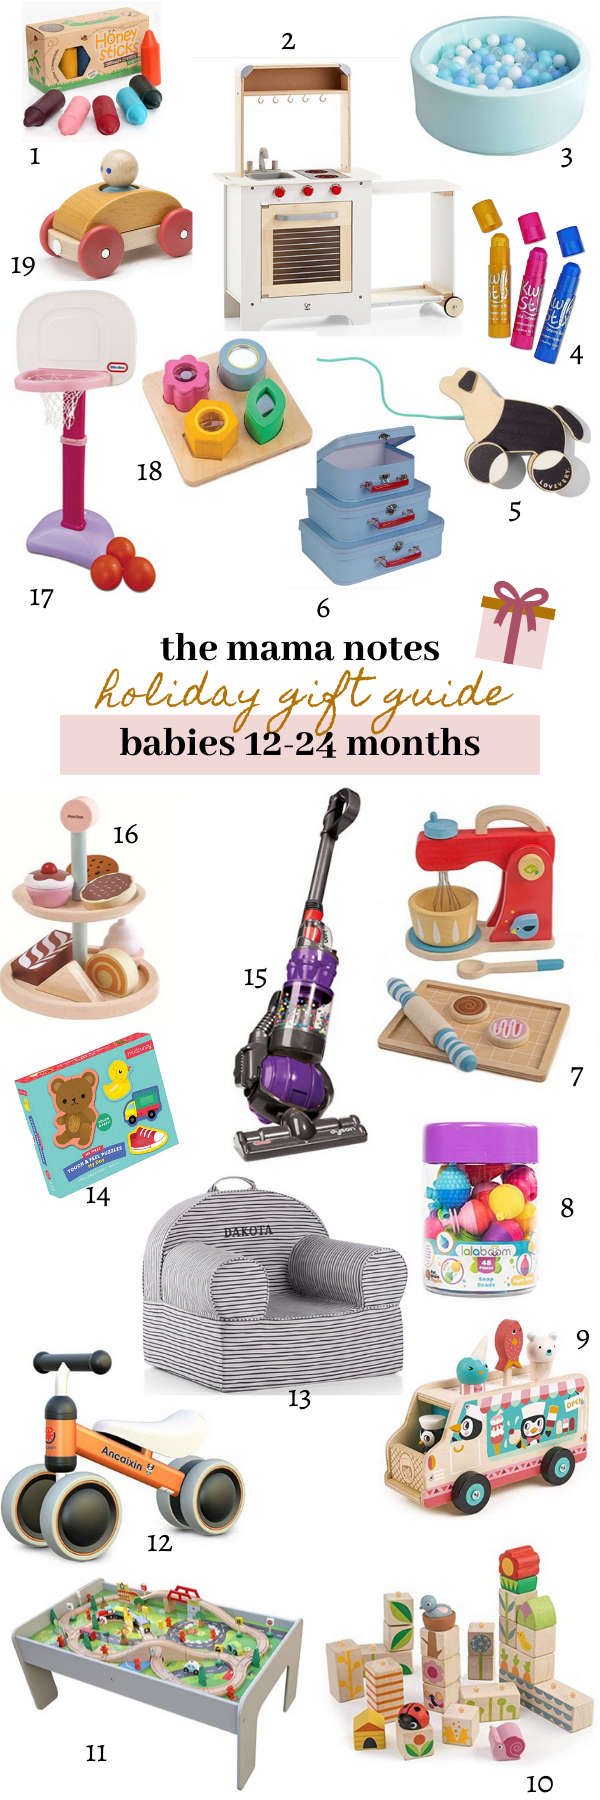 https://themamanotes.com/wp-content/uploads/2019/11/best-holiday-gifts-12-24-months.png